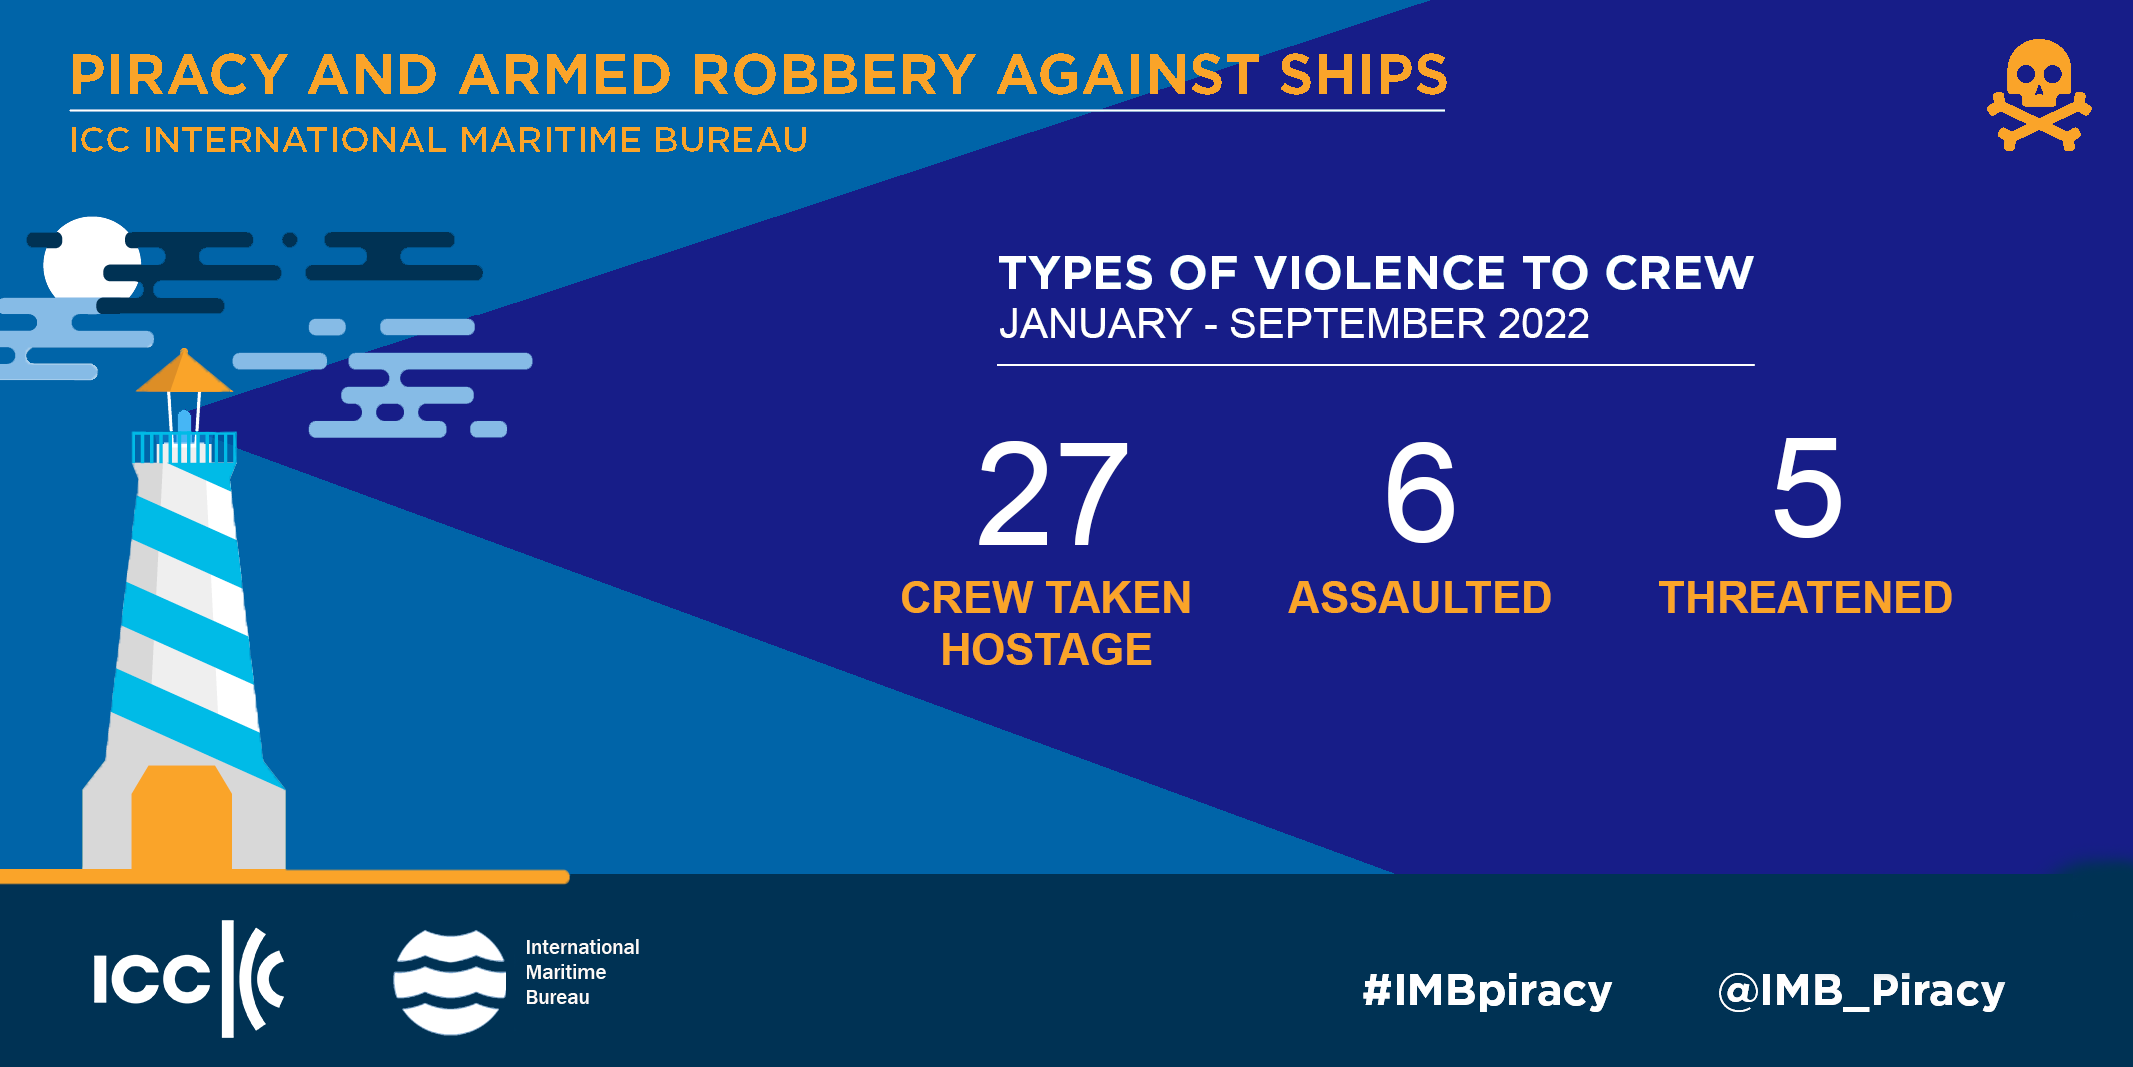 IMB: Global piracy incidents hit lowest levels in 30 years